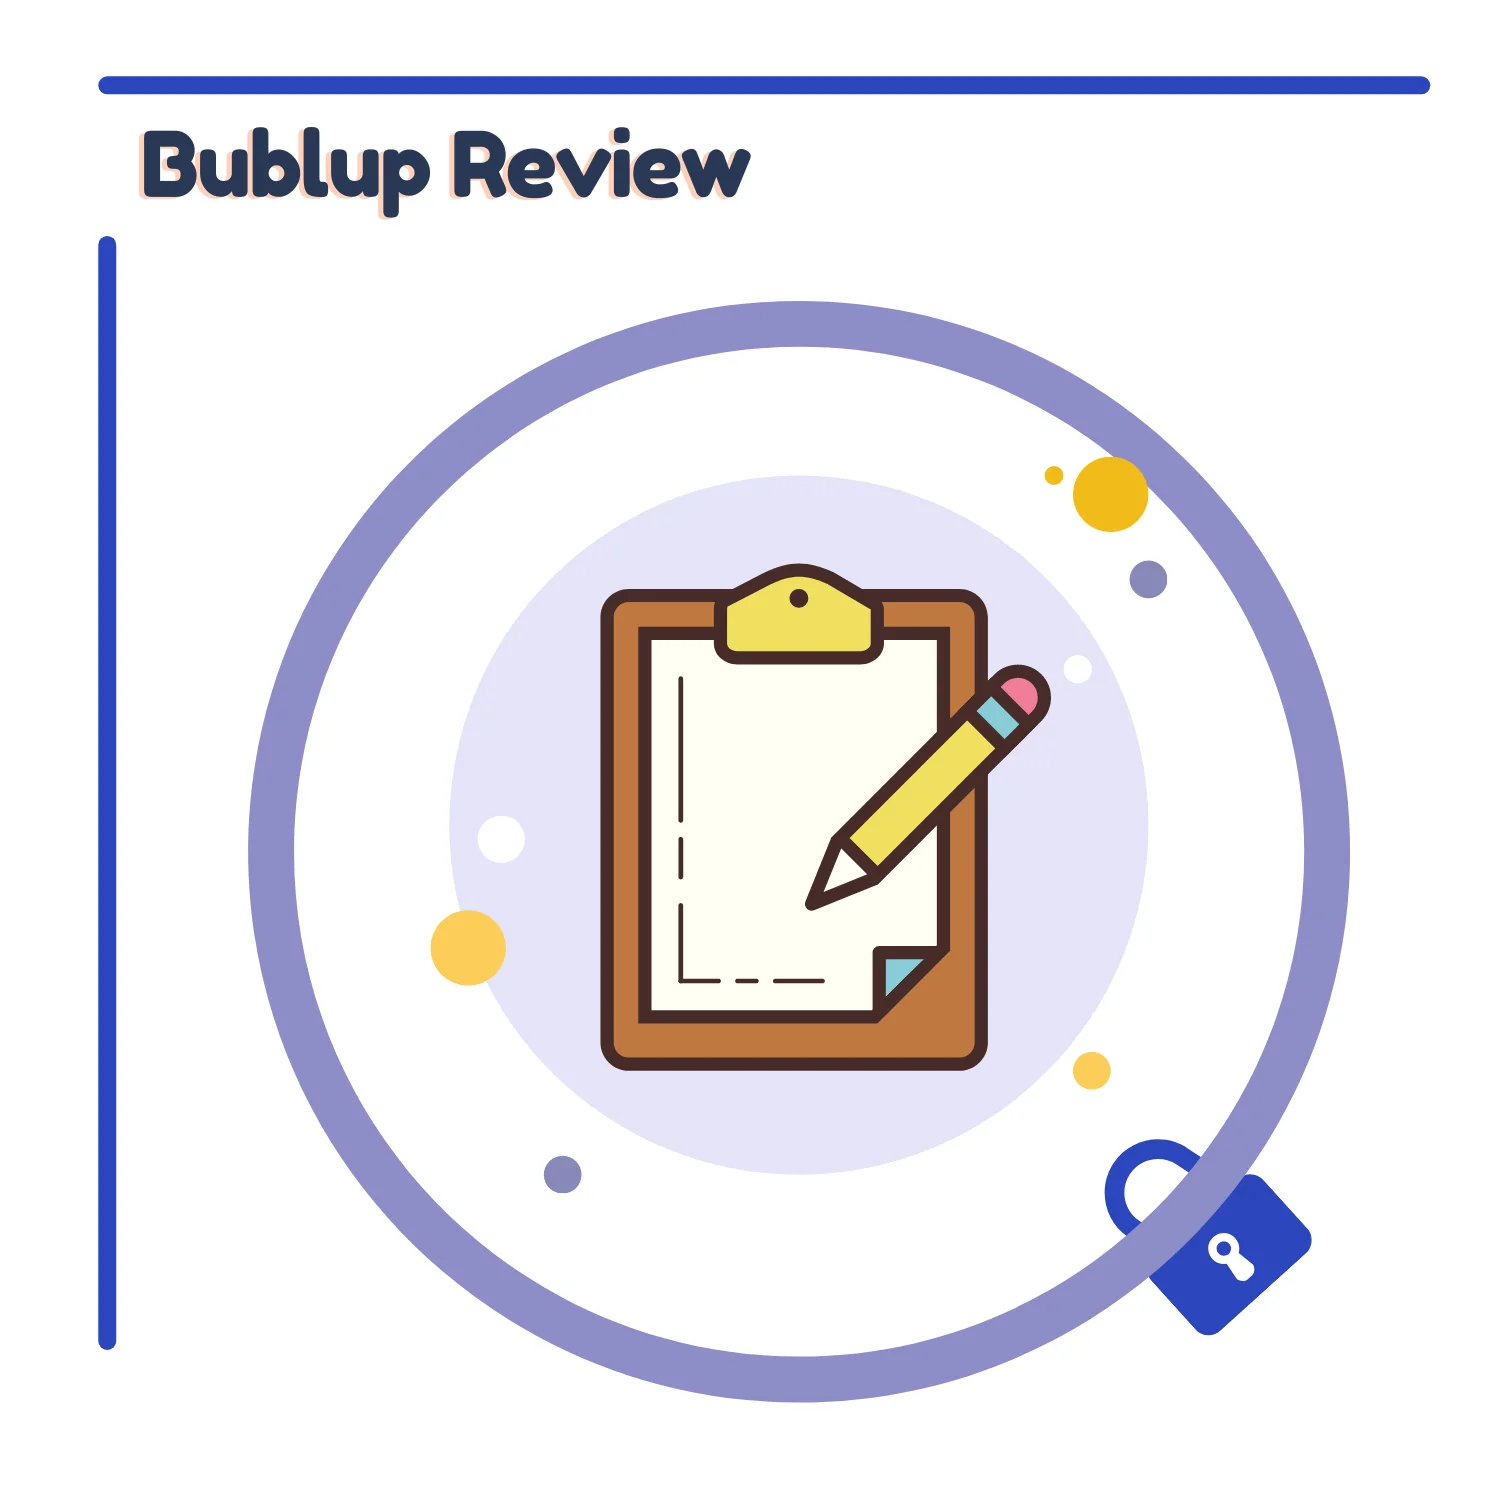 Bublup Review